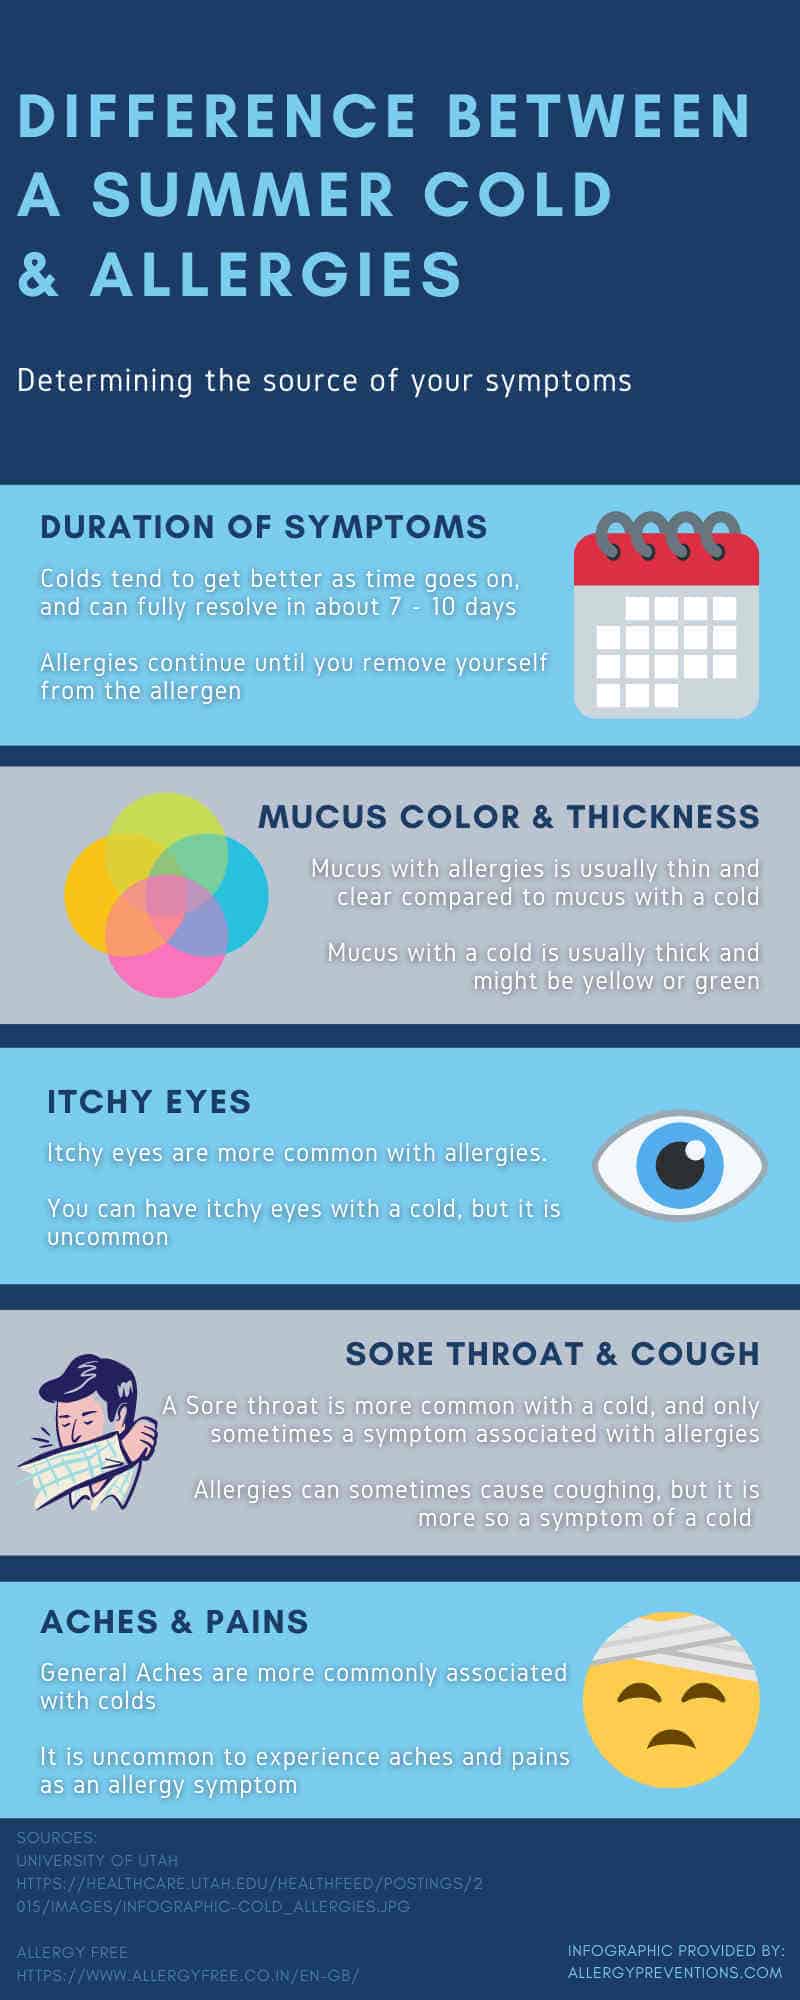 difference between a summer cold and allergies infographic. covering duration of symptoms, mucus color and thickness, itchy eyes, sore throat and cough, as well as aches and pains